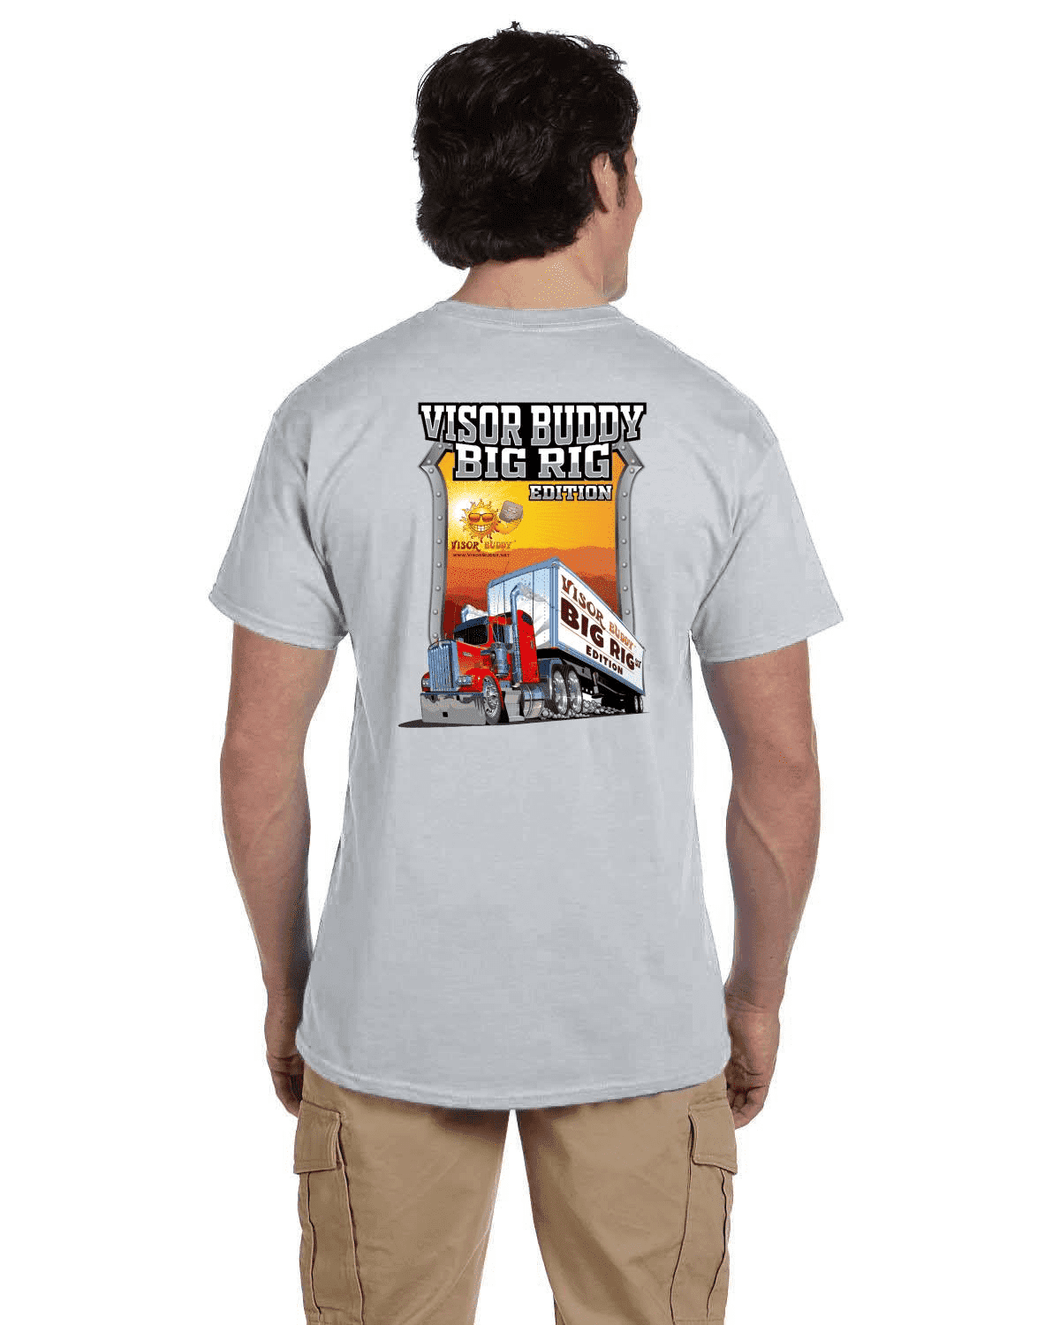 Big Rig T-Shirt - 100% Cotton - Fruit of the Loom with many colors to choose from. Visor Buddy